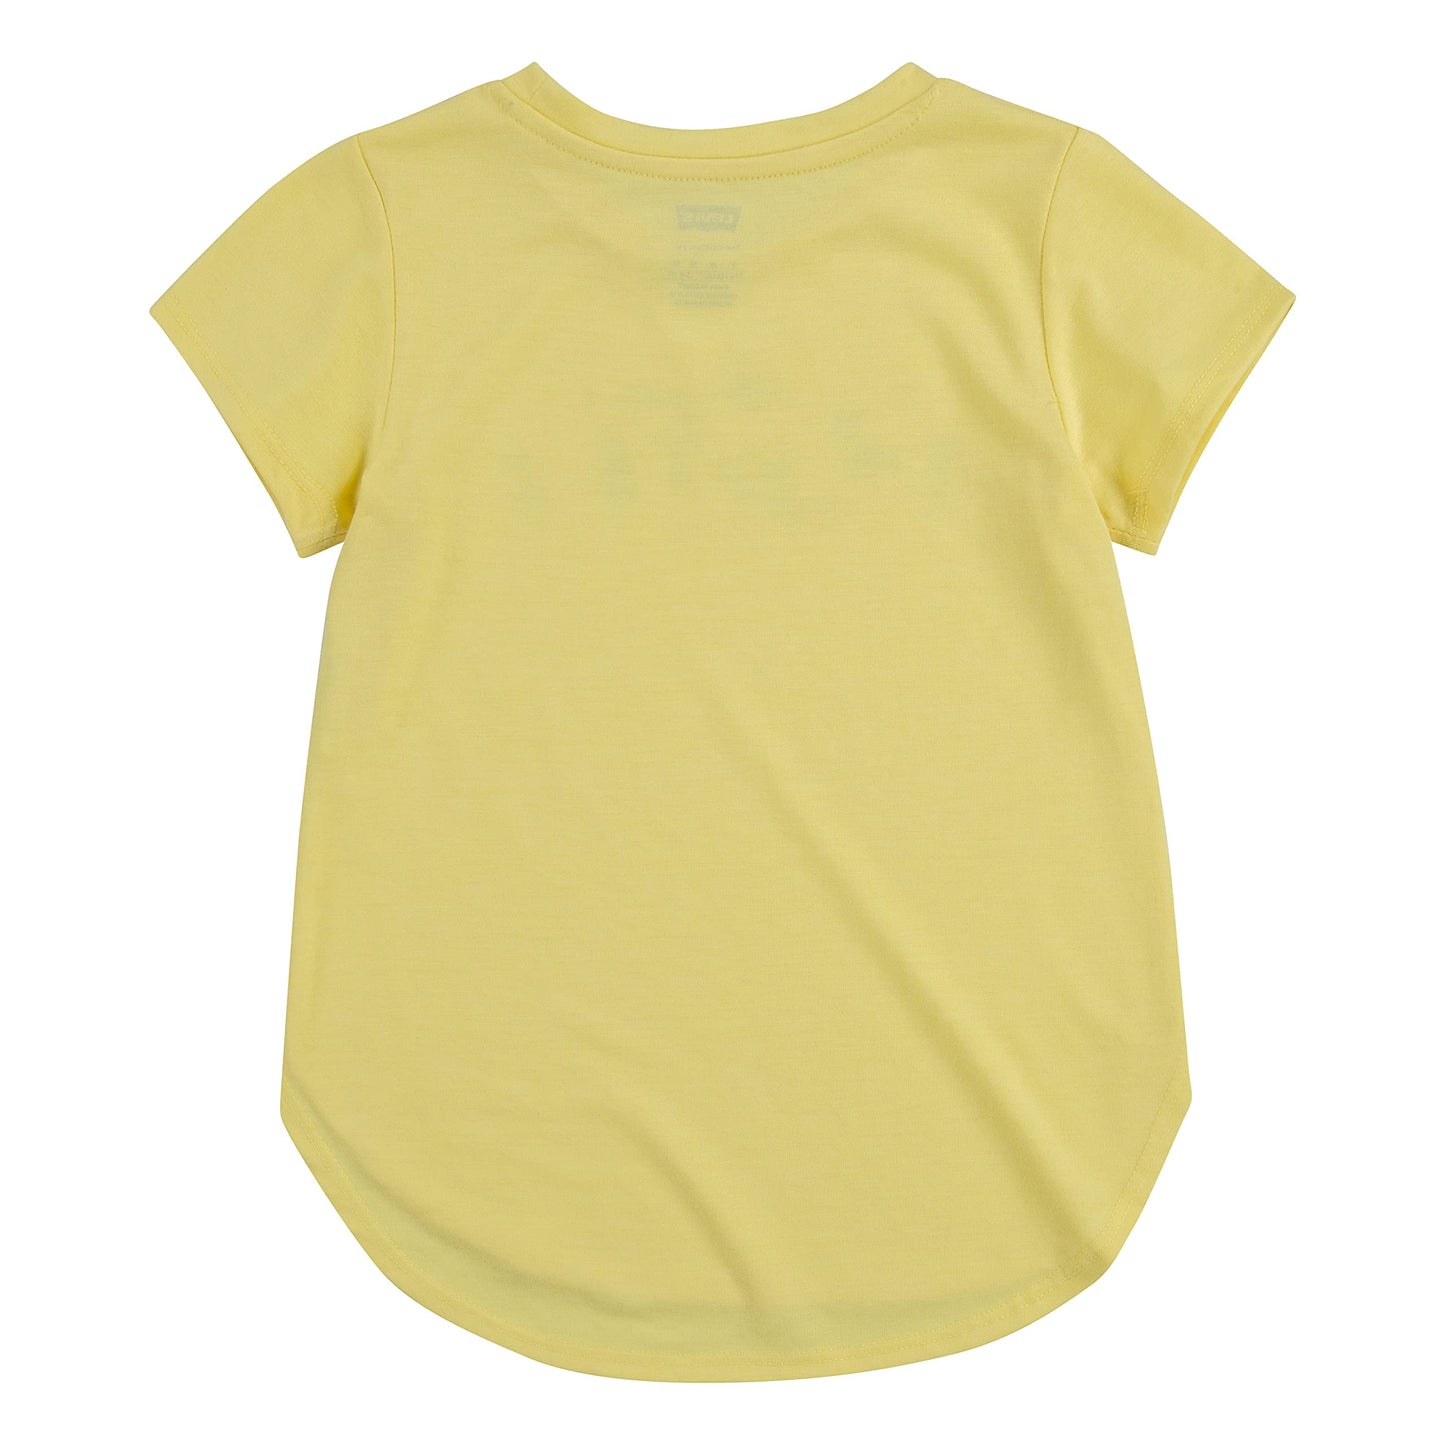 Image 2 of High-Low Graphic Tee Shirt (Little Kids)